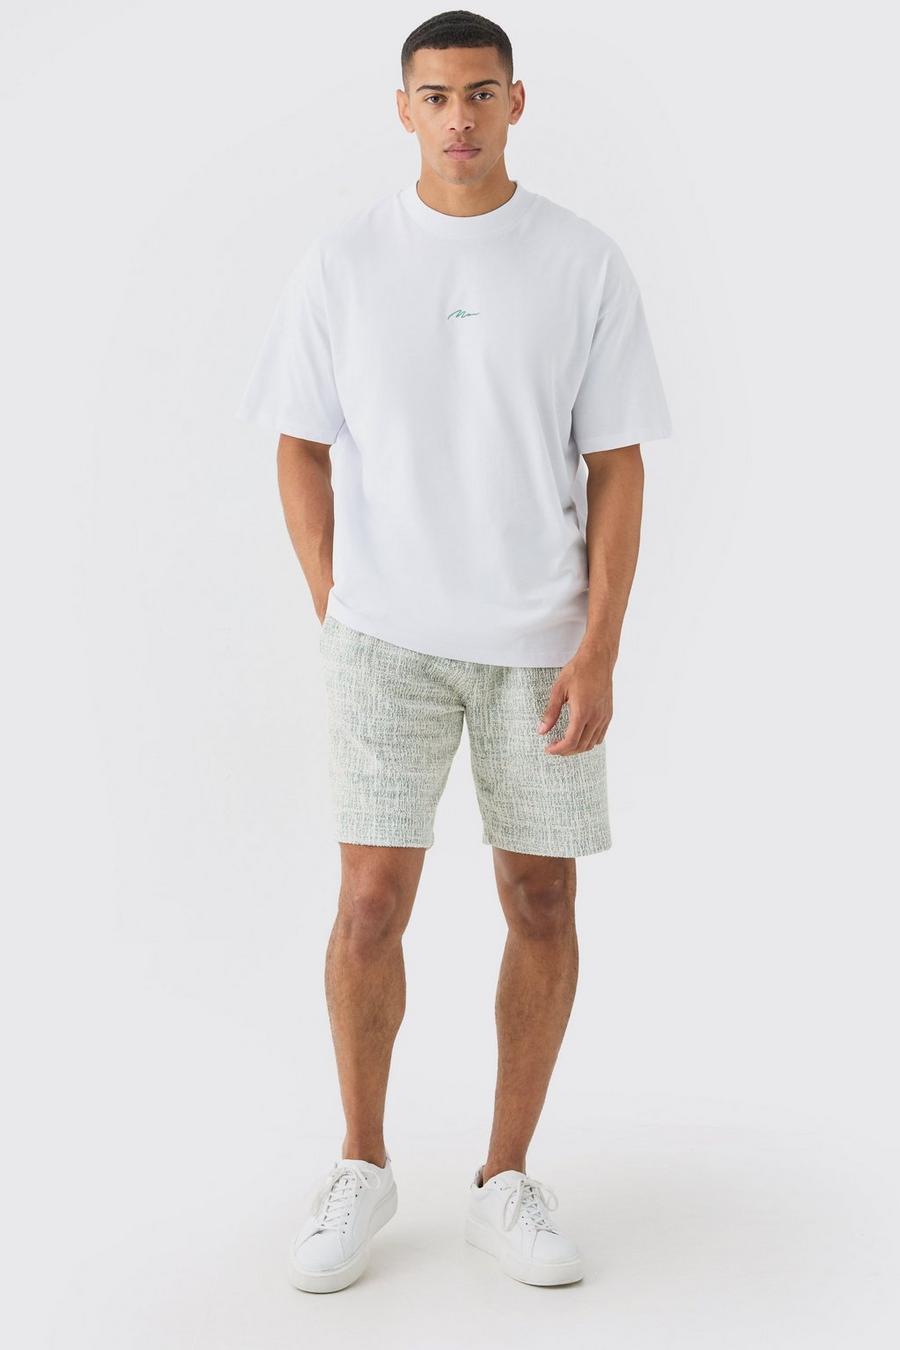 Green Man Oversized Extended Neck T-shirt And Textured Shorts Set